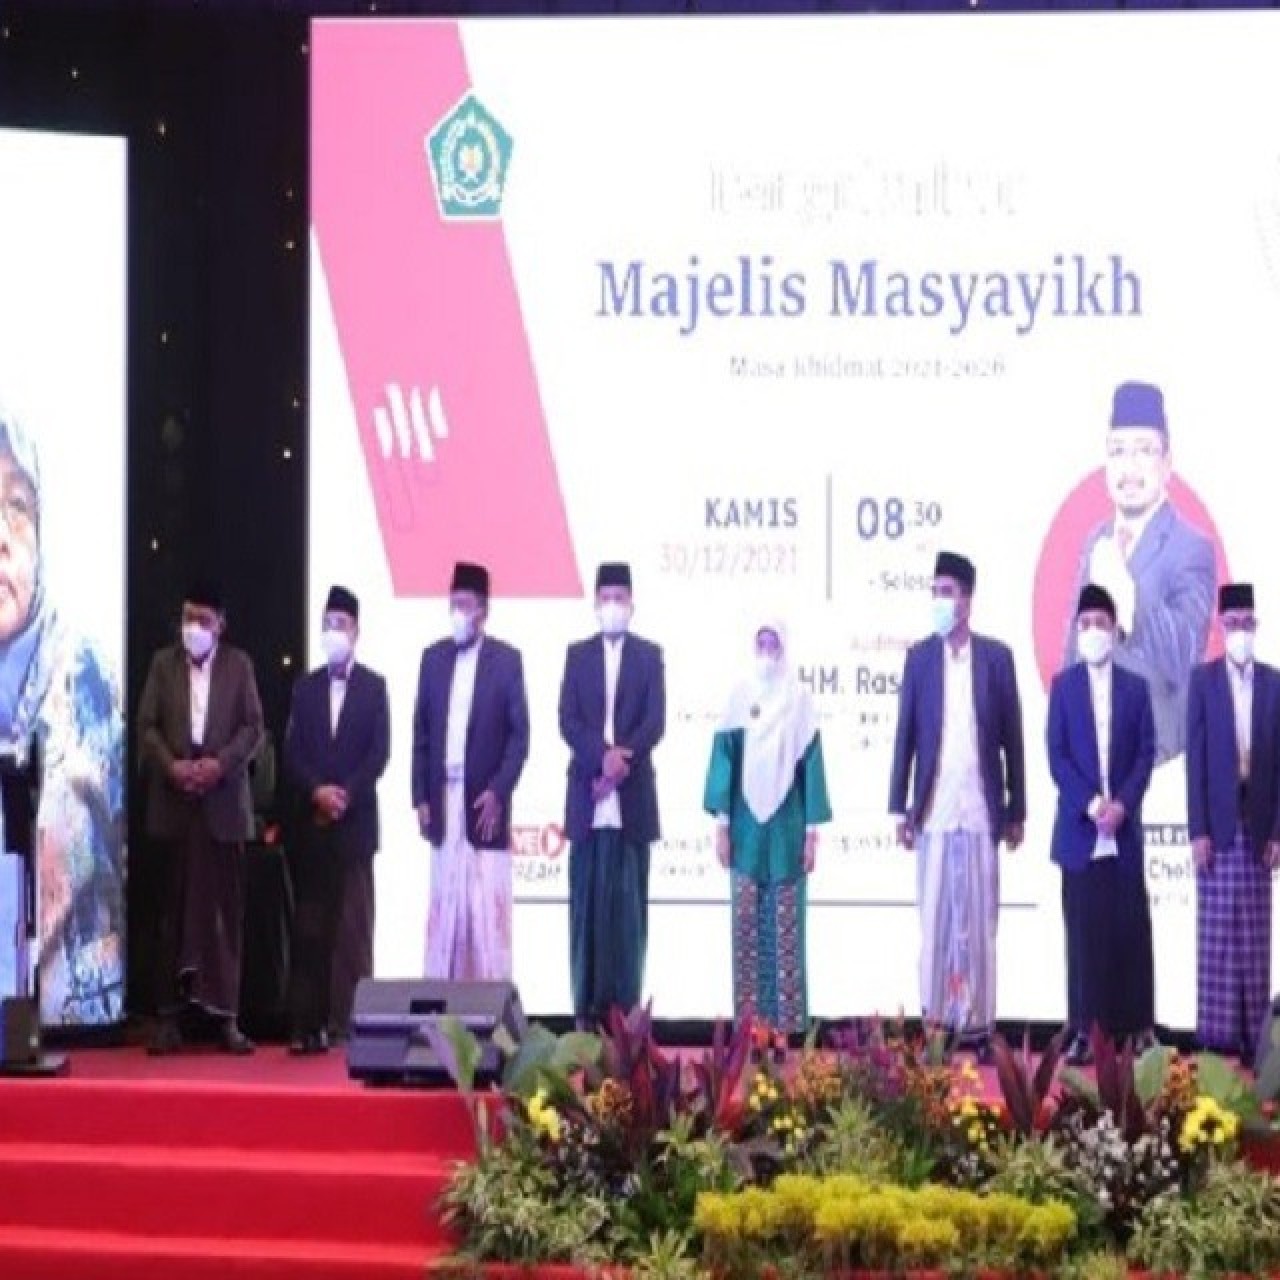 Minister of Religious Affairs appoints 9 Masyayikh Council members